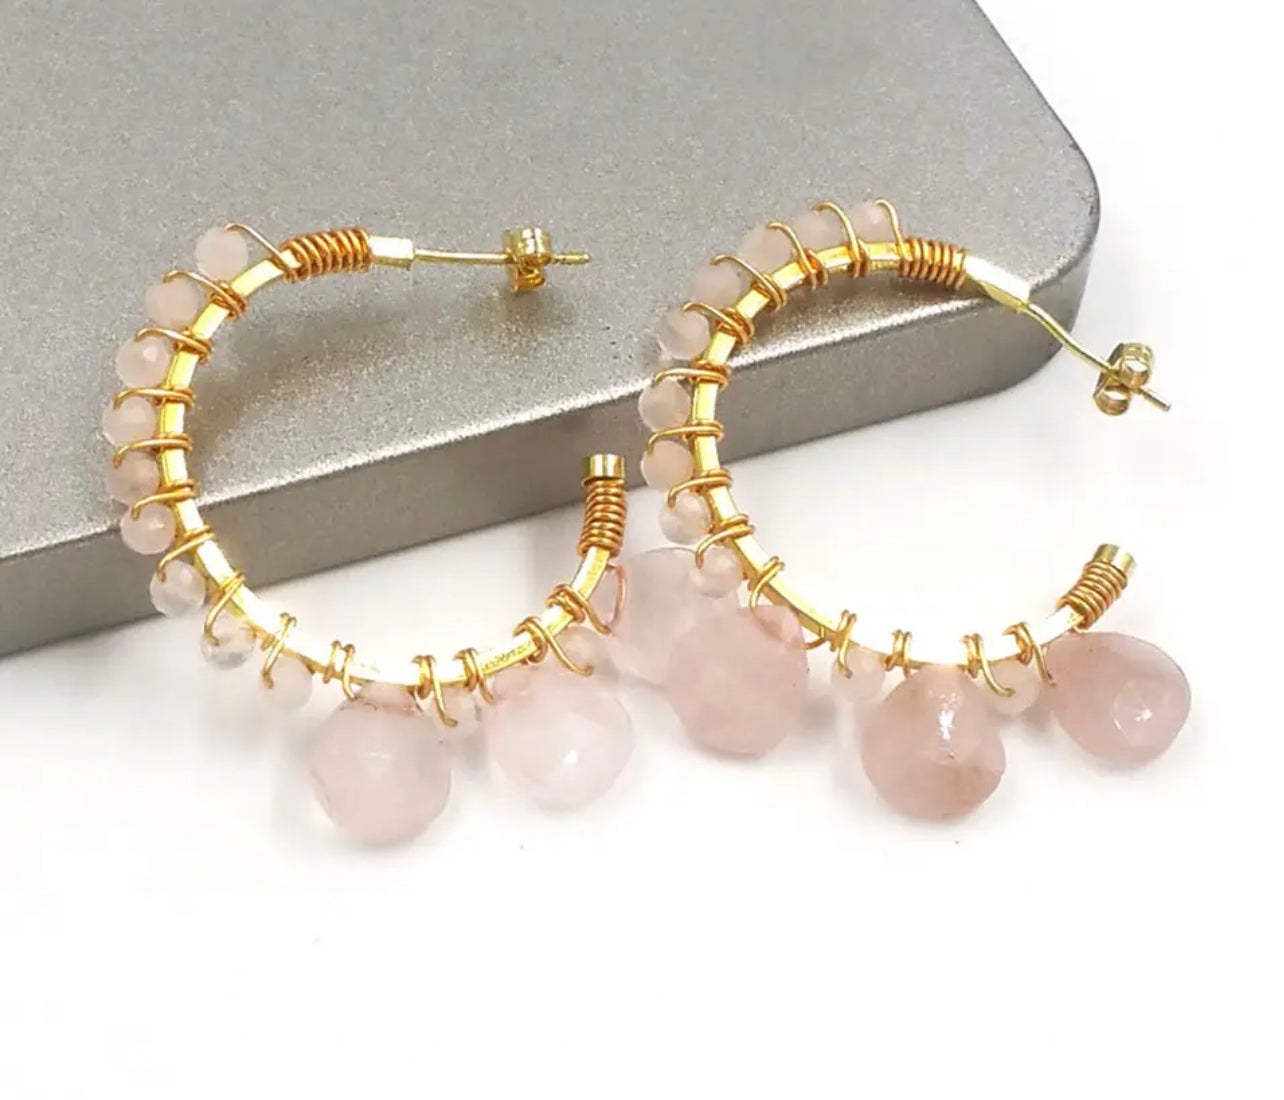 Stainless steel Hoops with Faceted Pink Quartz and Teardrop Gemstones